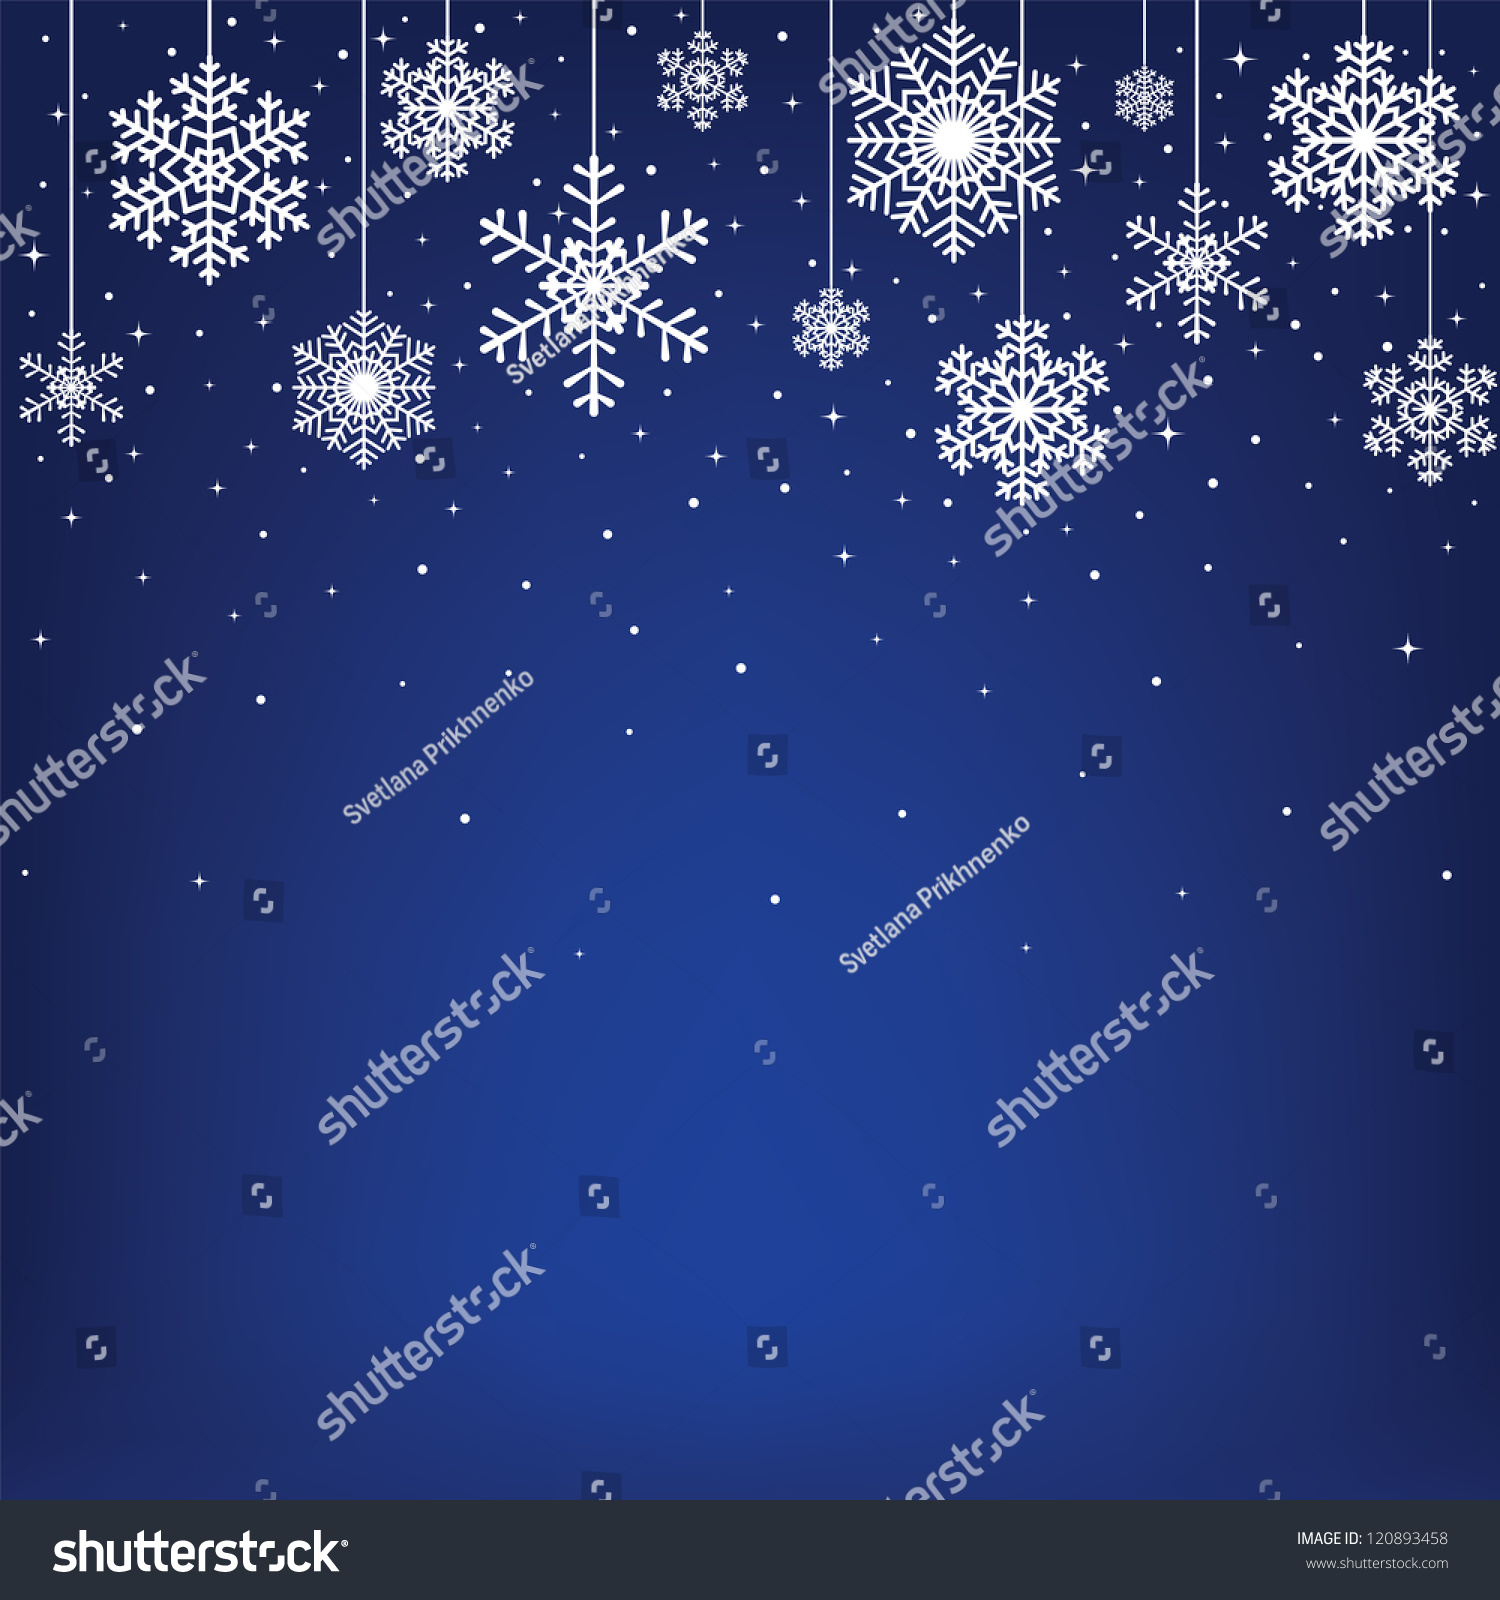 Christmas card with hanging snowflakes on dark blue background